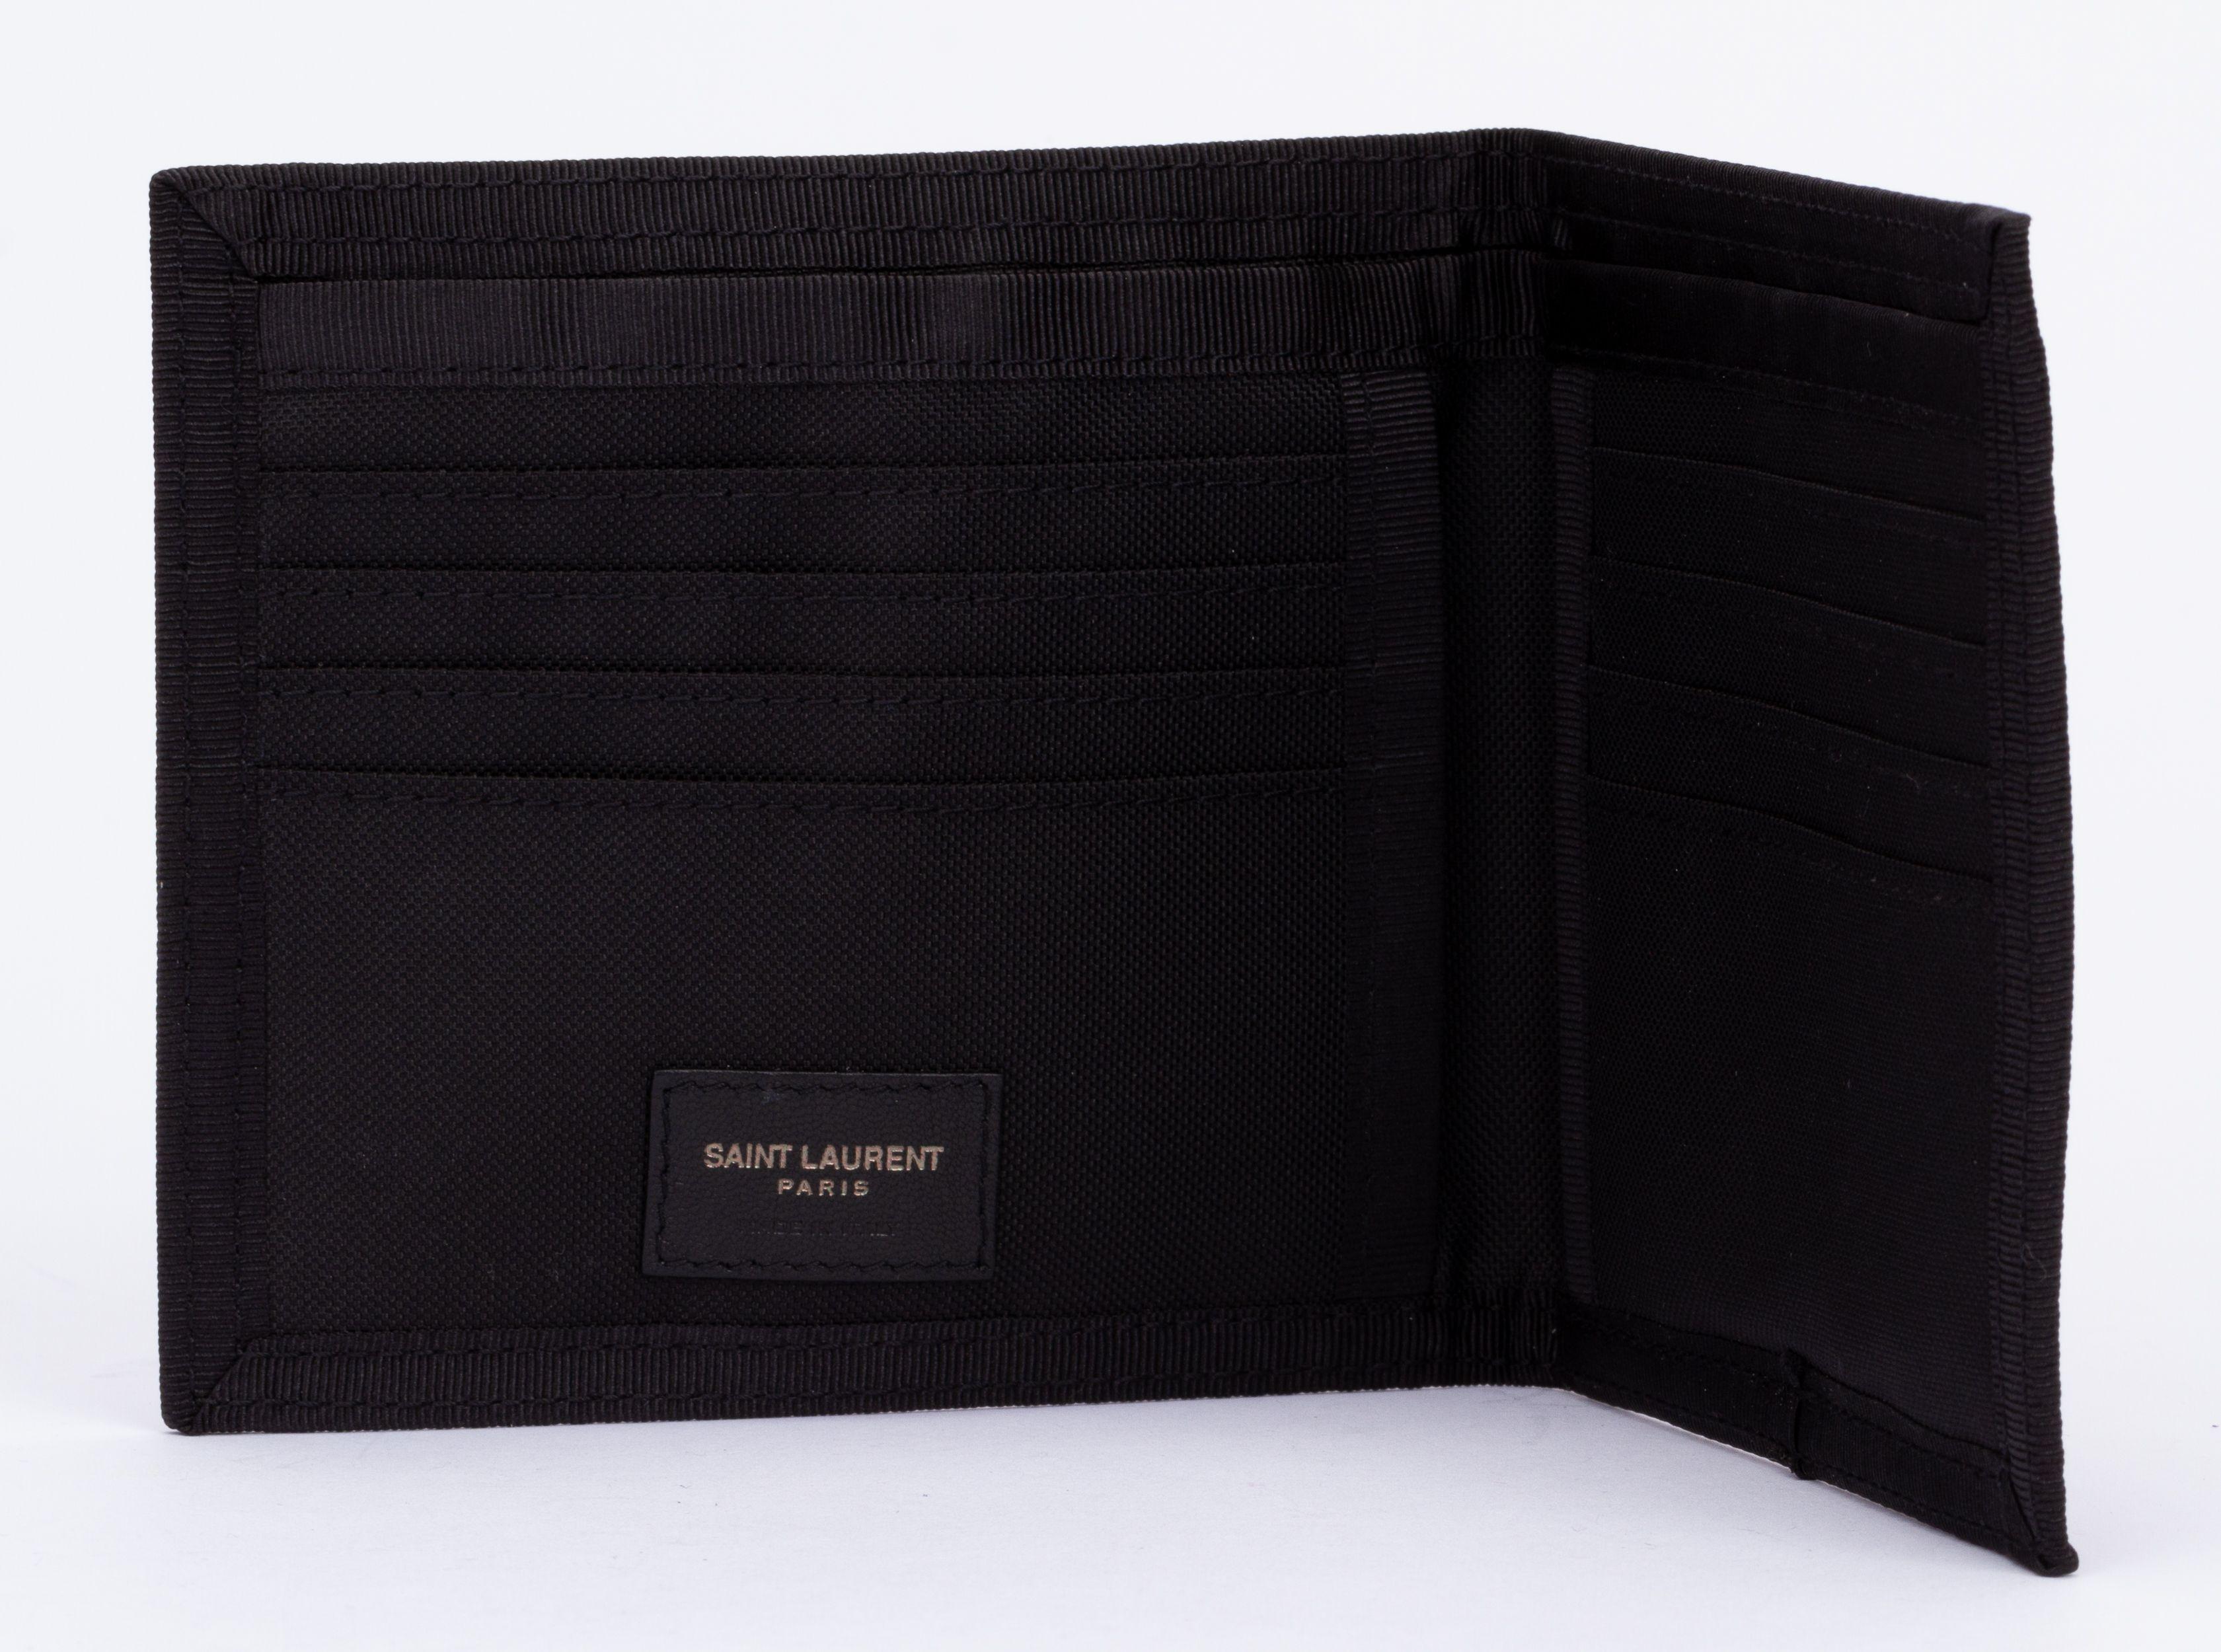 Yves Saint Laurent brand new bifold wallet in black technical fabric. Includes original box and dust cover.
